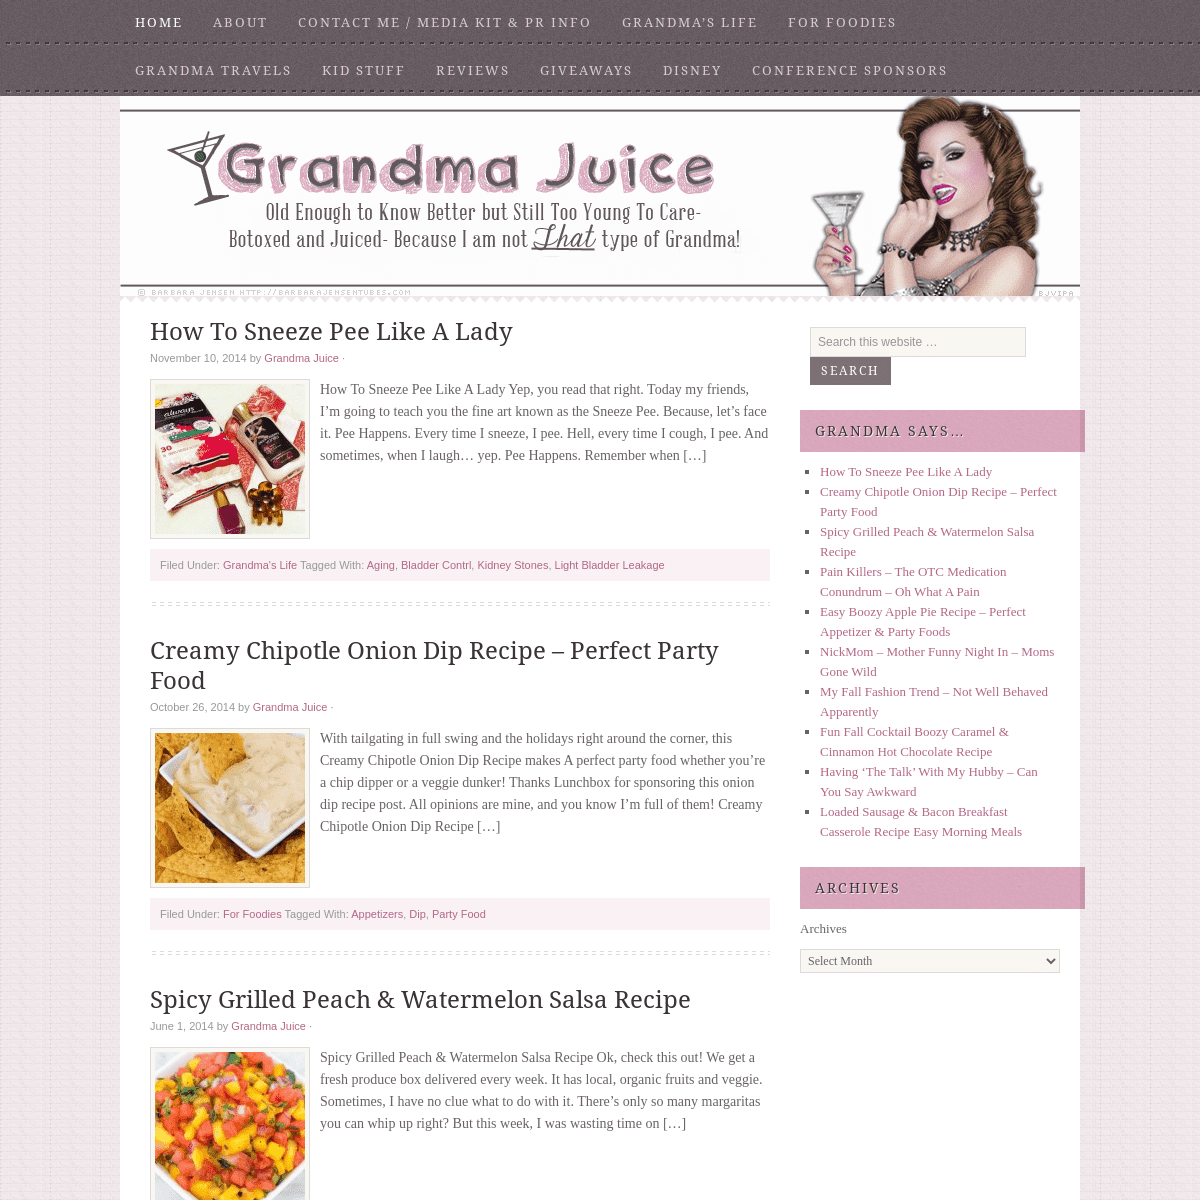 A complete backup of https://grandmajuice.net